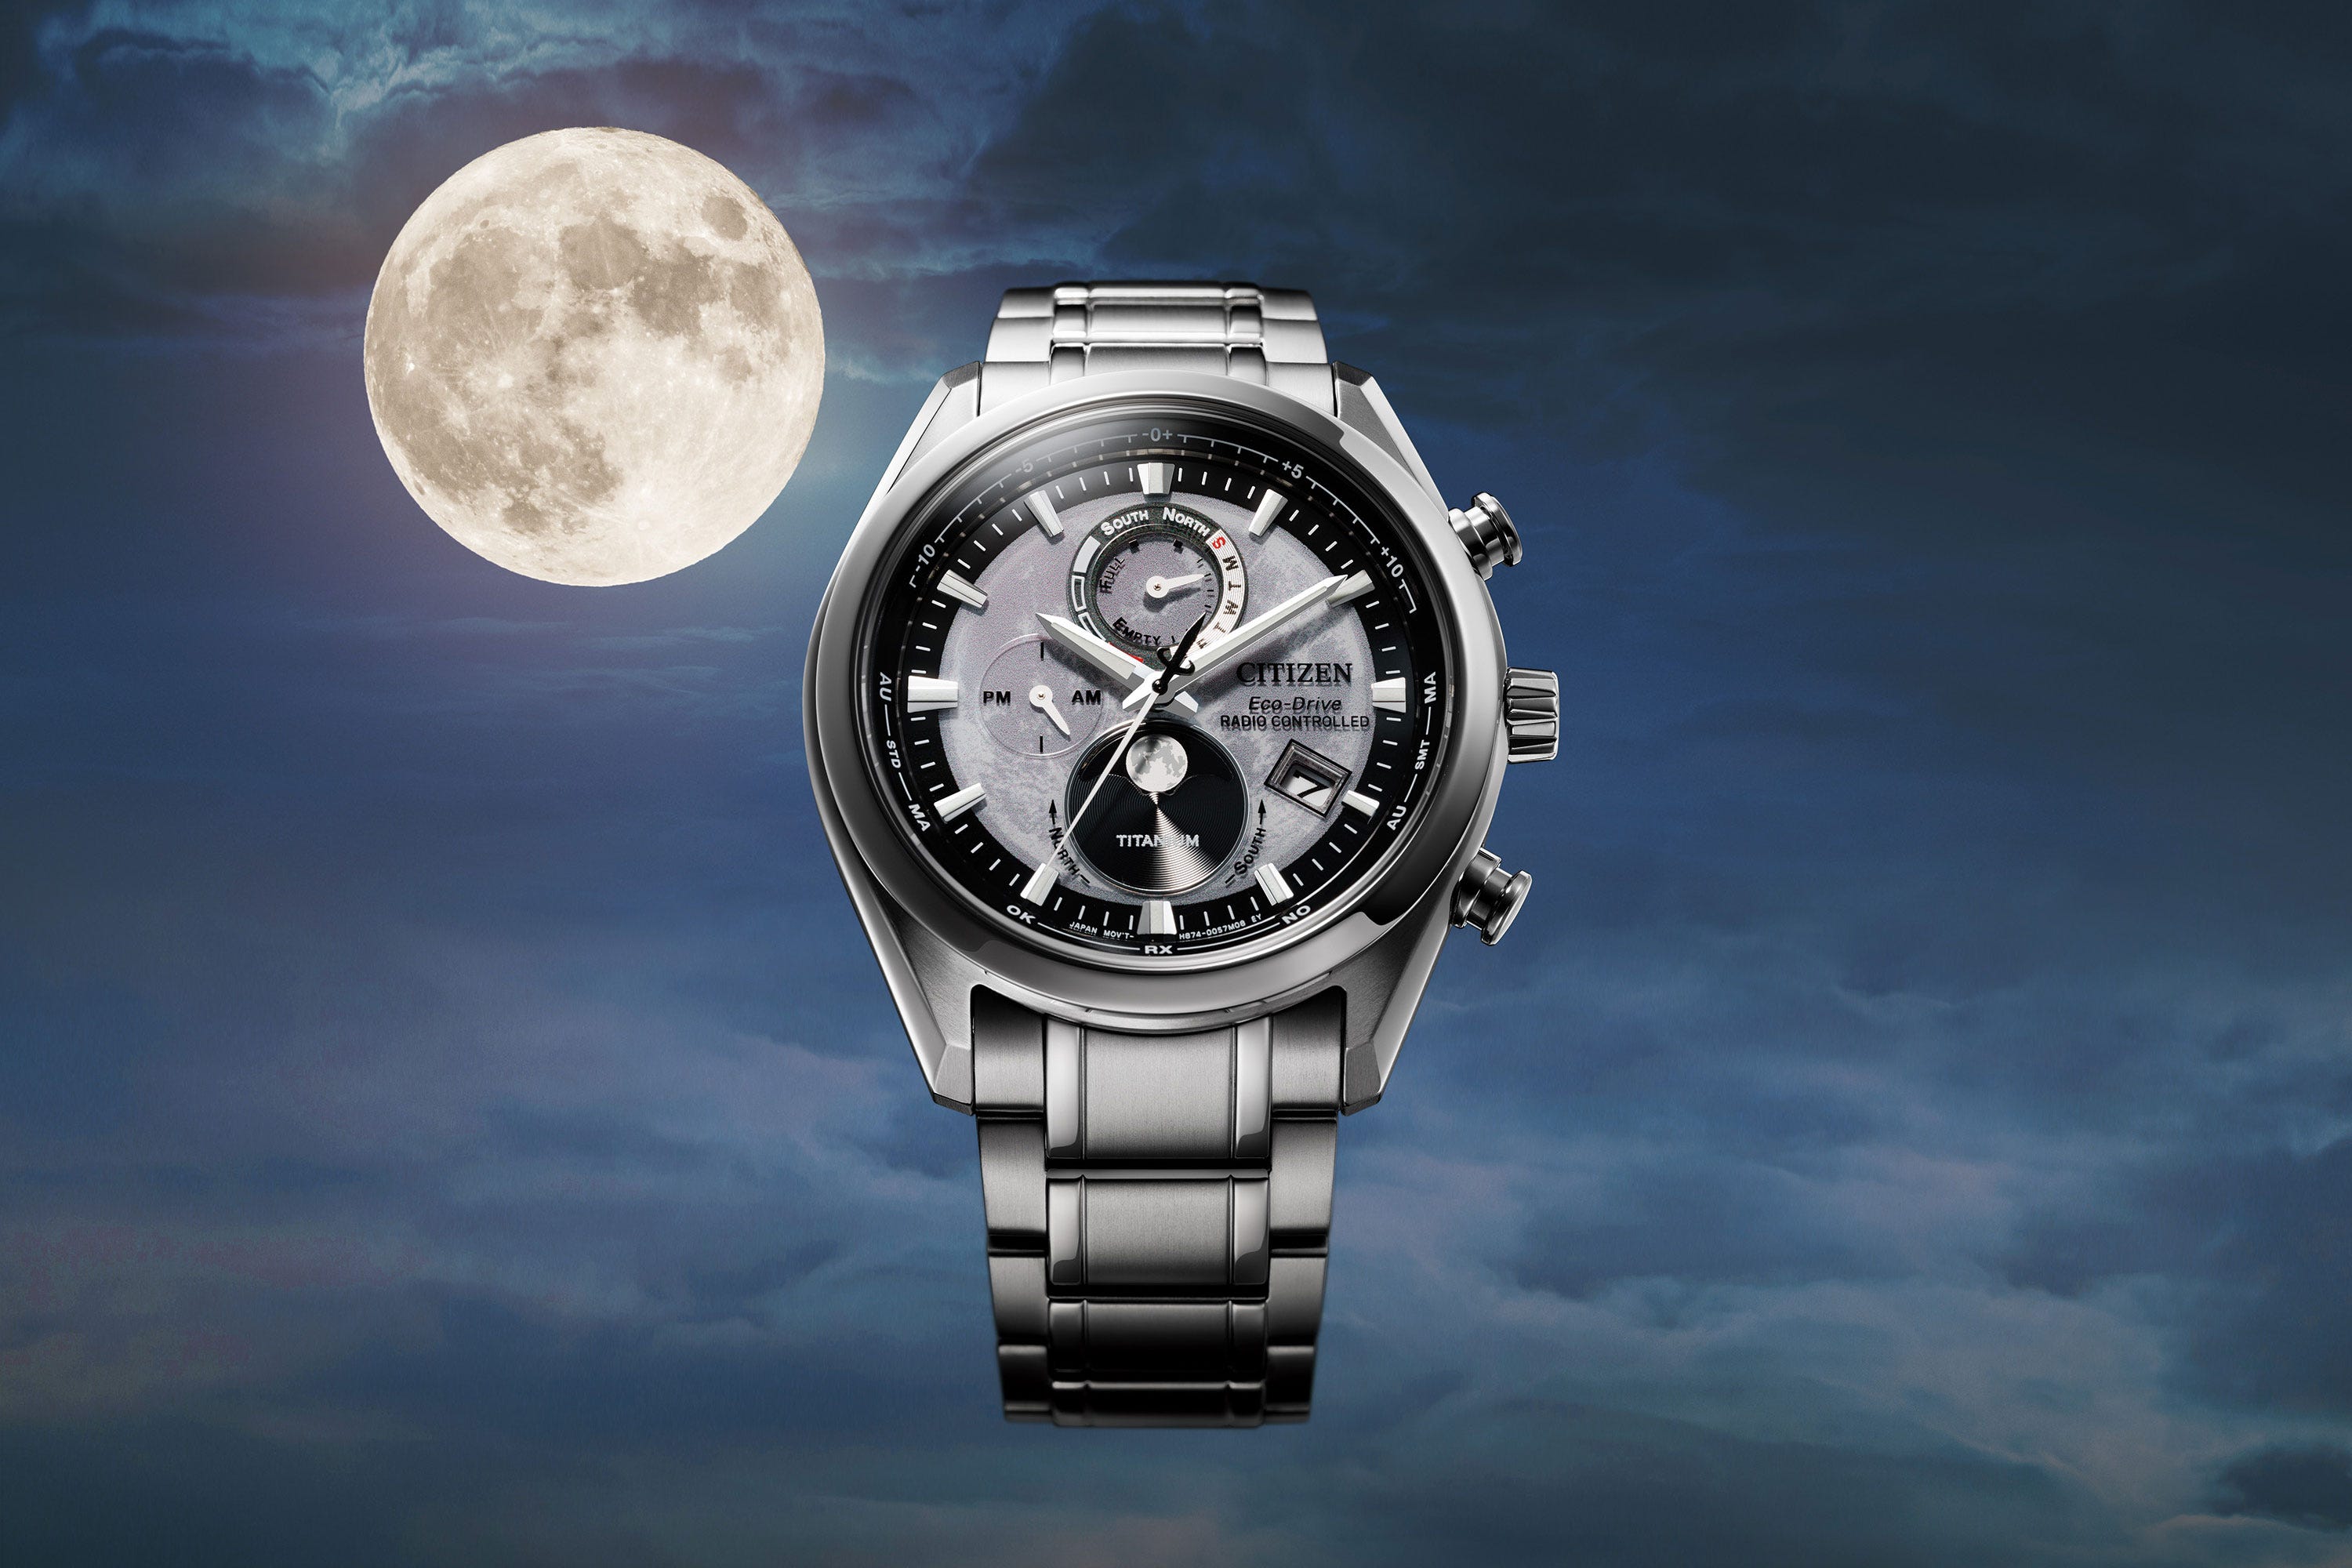 The Citizen Tsuki-Yomi A-T Moonphase Perpetual, And How Radio 